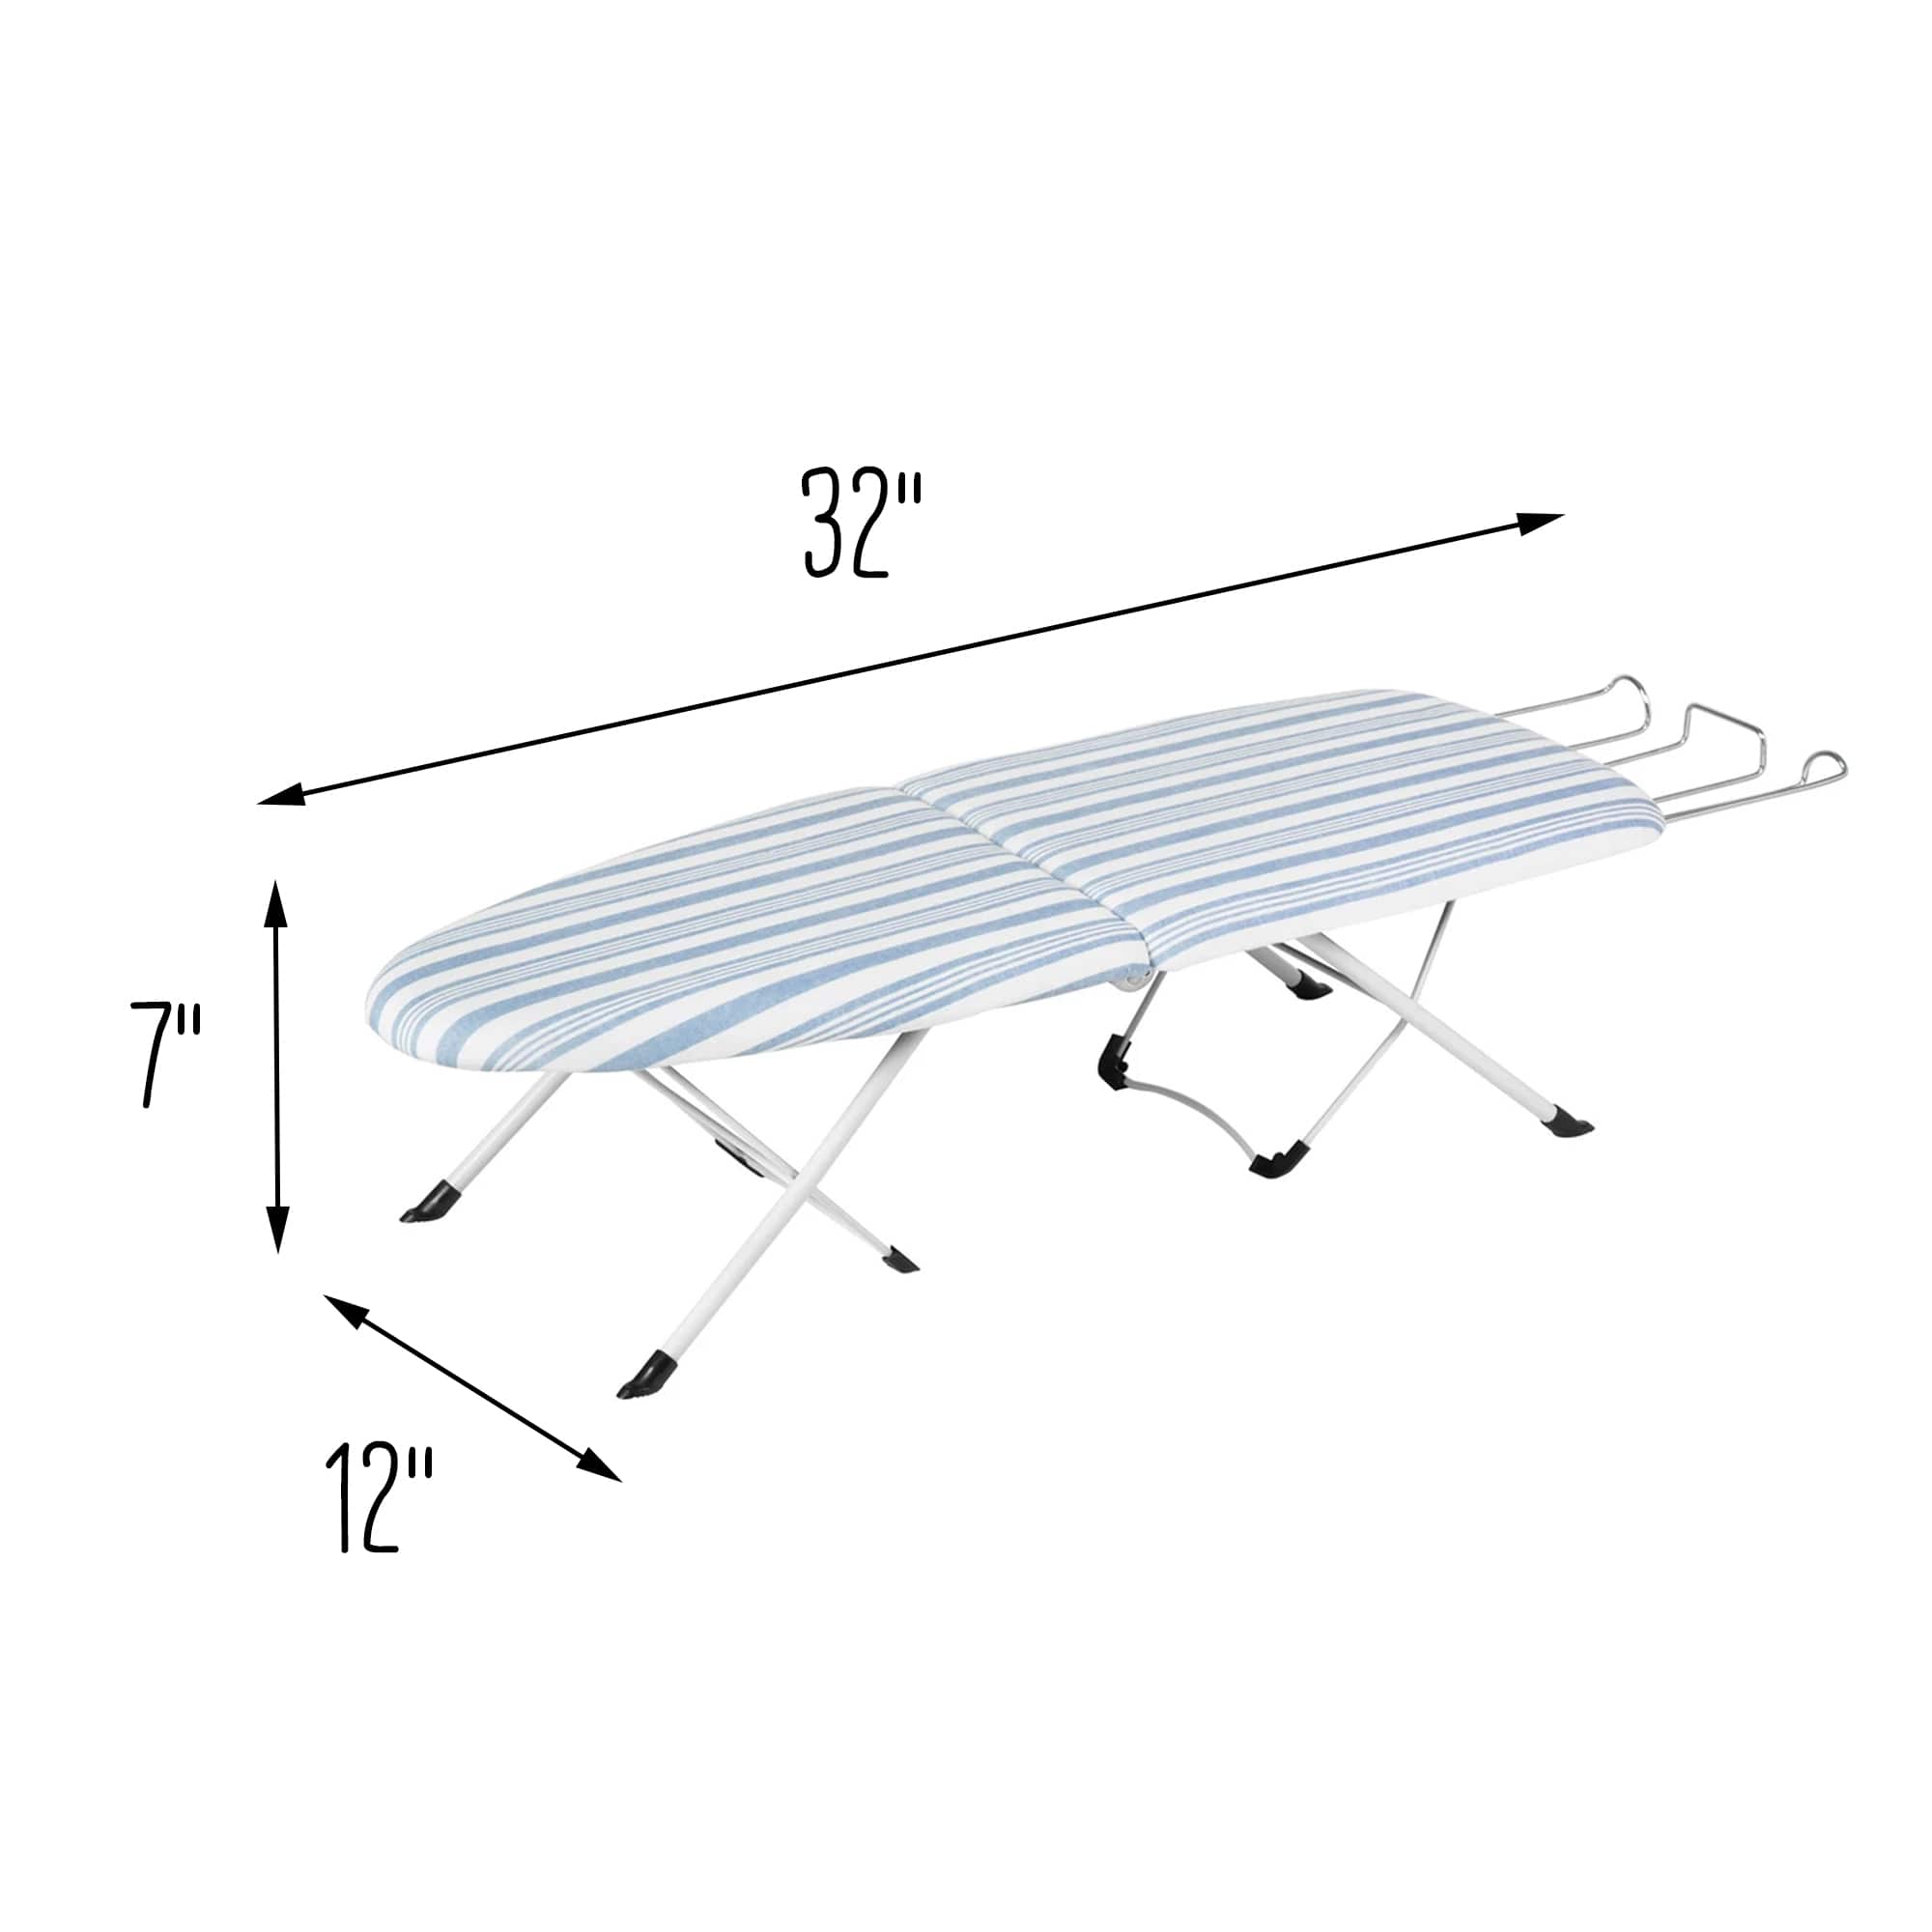 Honey Can Do Foldable Tabletop Ironing Board with Iron Rest